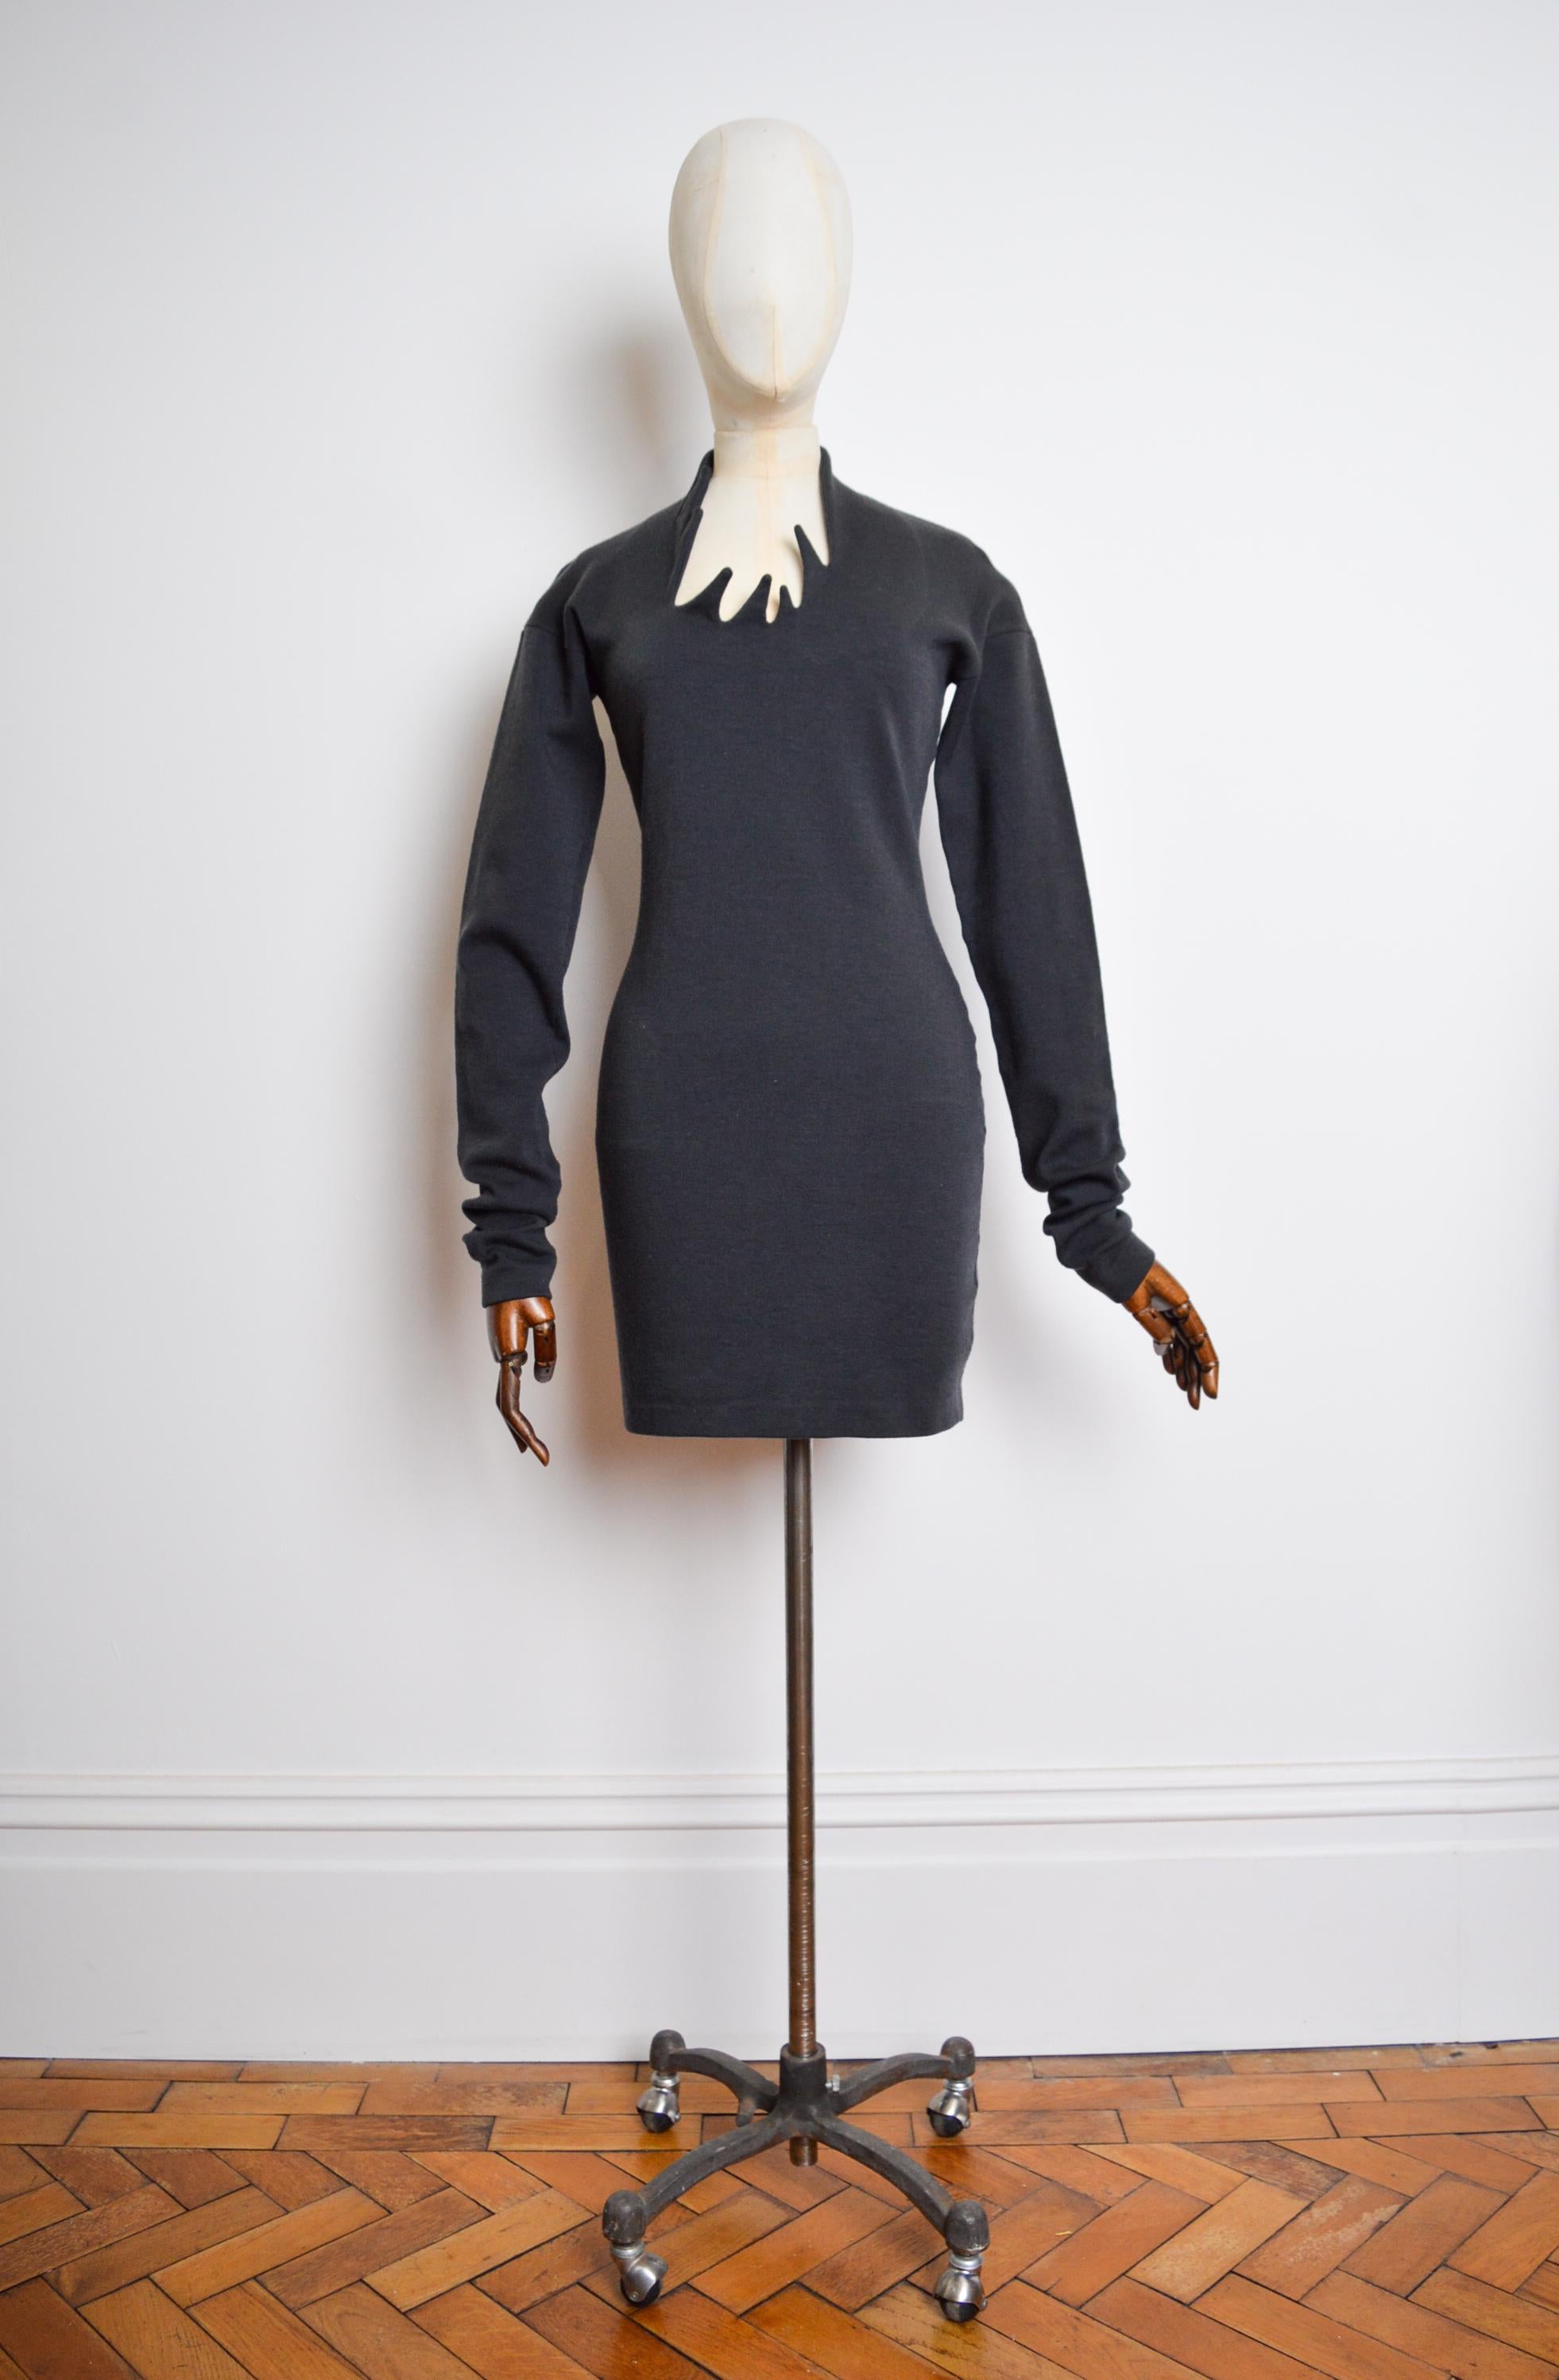 Avant Guard 1990's detailed ROMEO GIGLI figure hugging body con dress, crafted from a thick, stretchy Wool material.

MADE IN ITALY !

94% Wool
6% Spandex

Measurements are in inches -

Pit to pit - 17.5